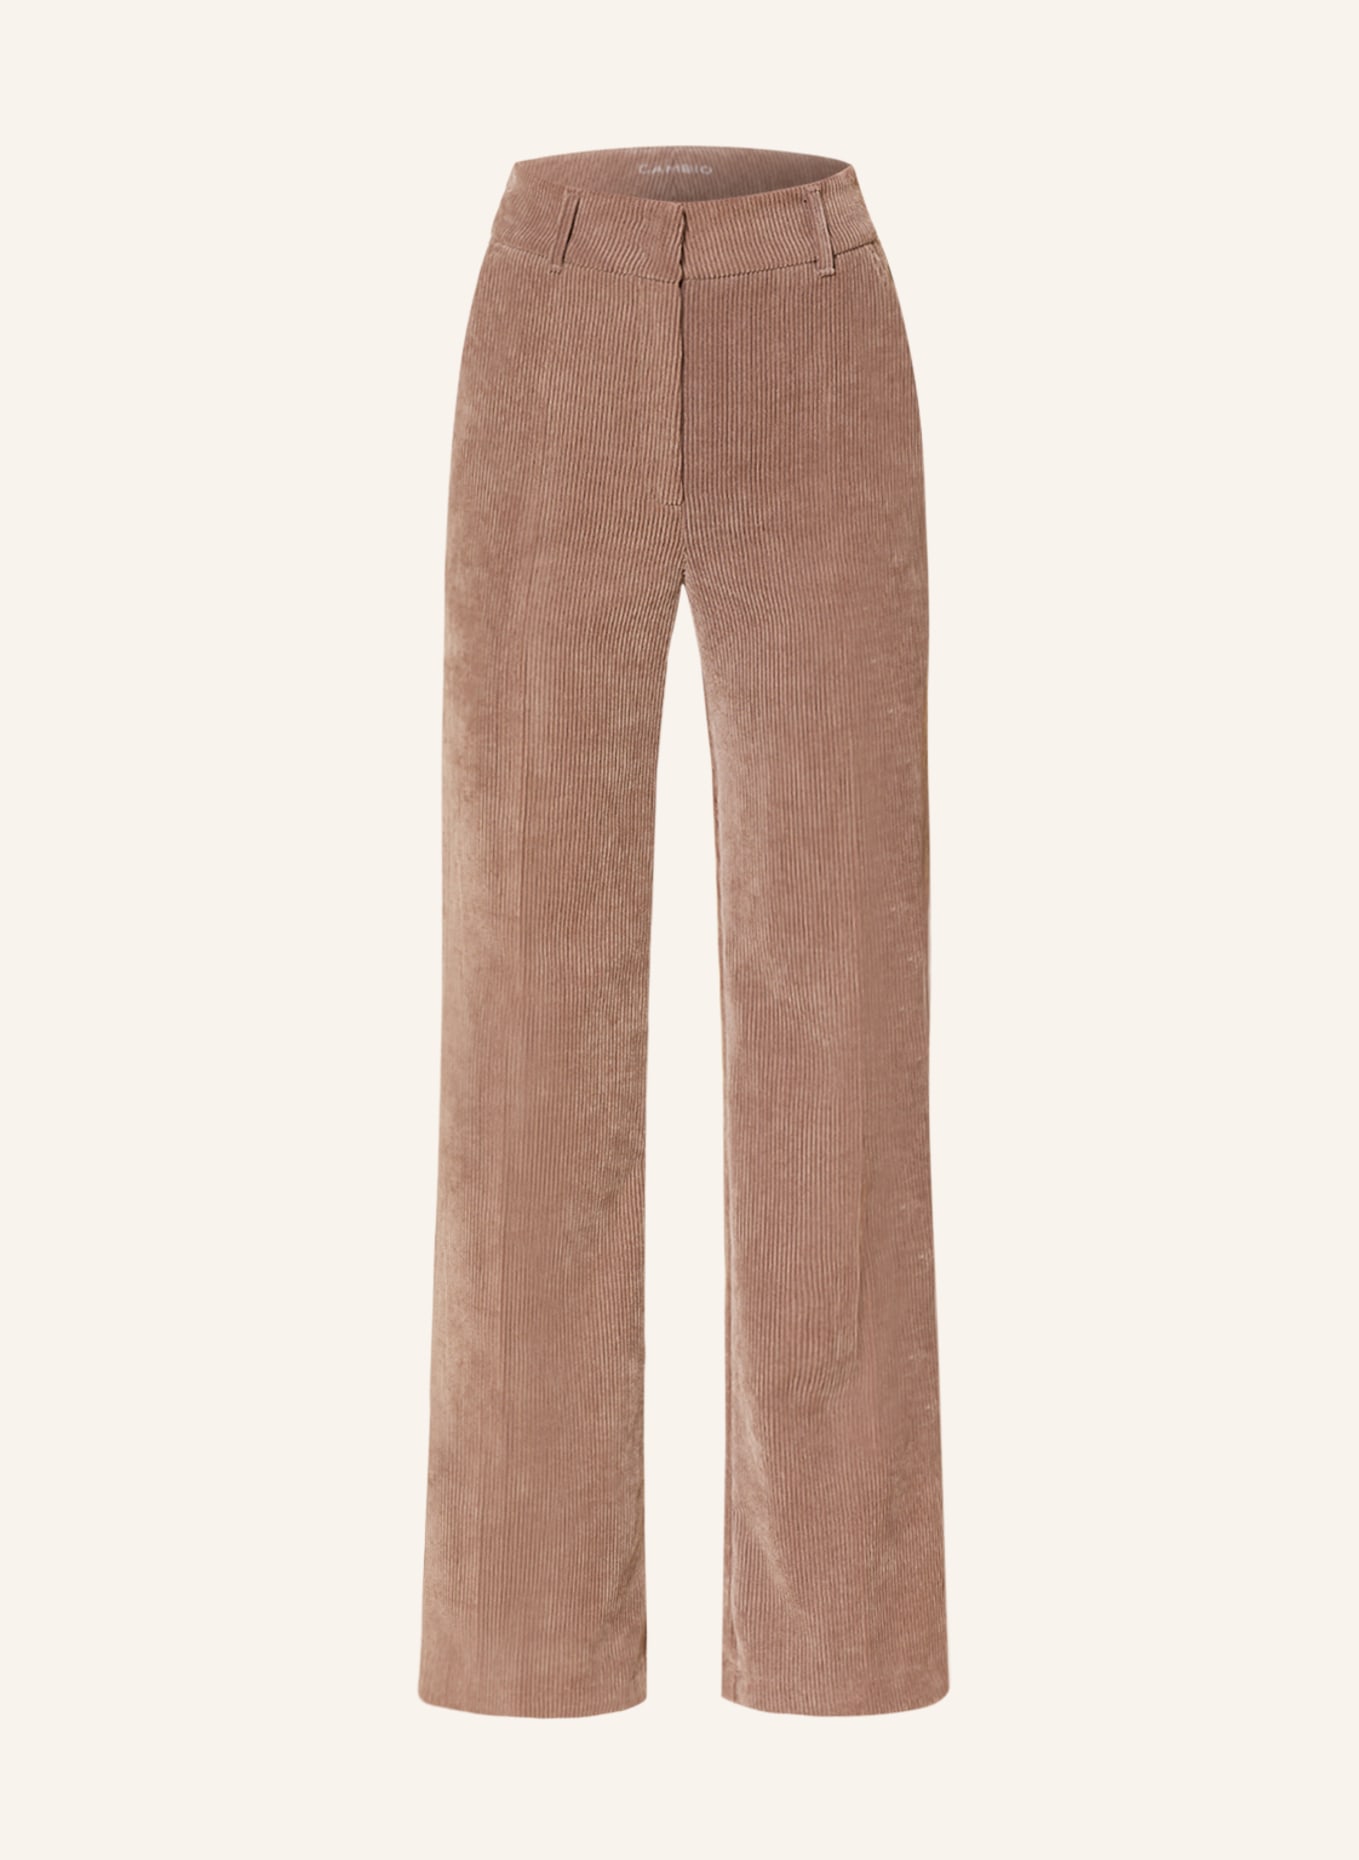 CAMBIO Wide leg trousers AMELIE made of corduroy, Color: LIGHT BROWN (Image 1)